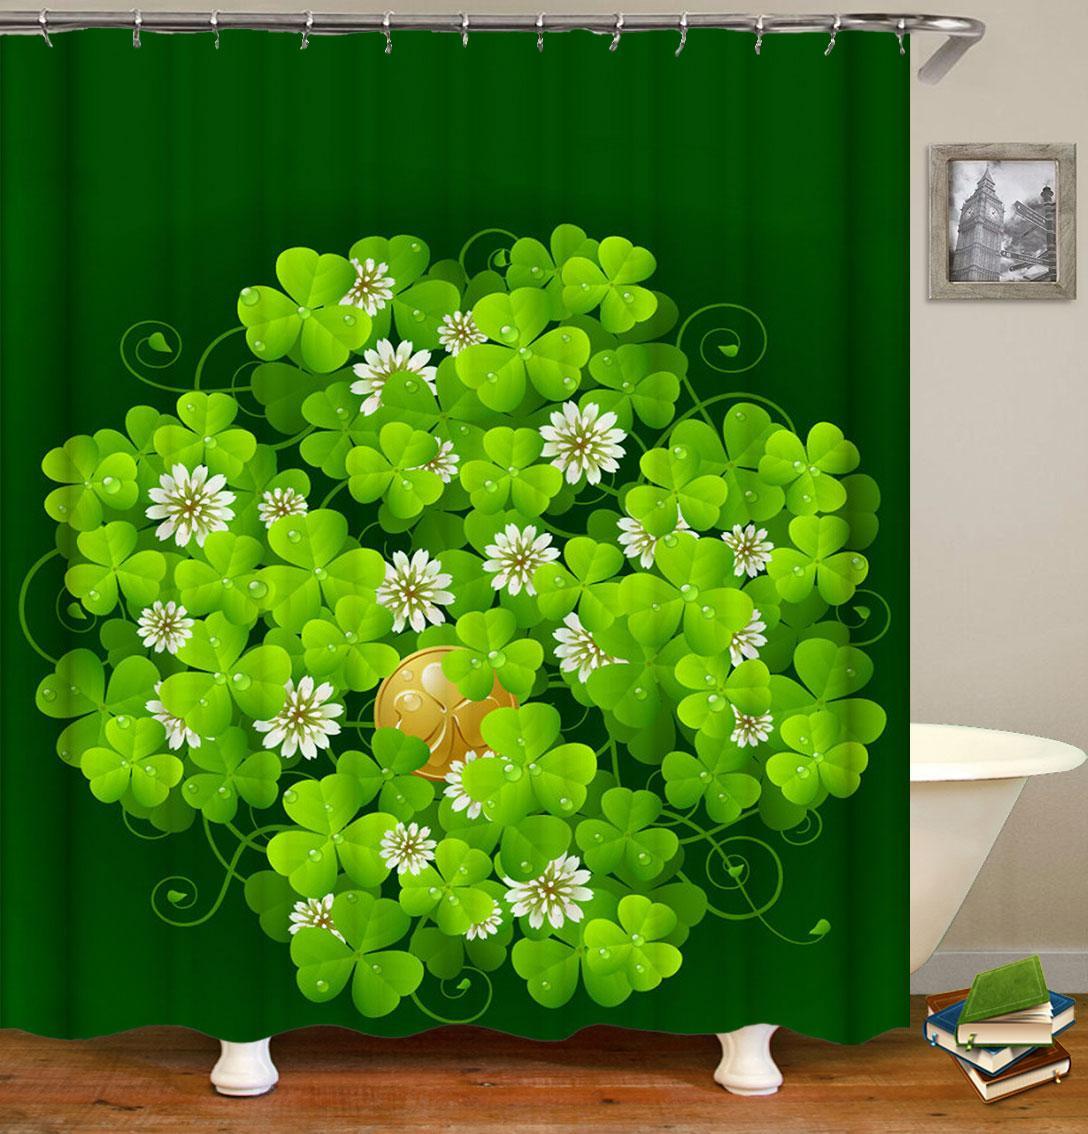 Green Clovers and Clover Flowers Shower Curtain 136cm x 200cm Shower Curtain Only